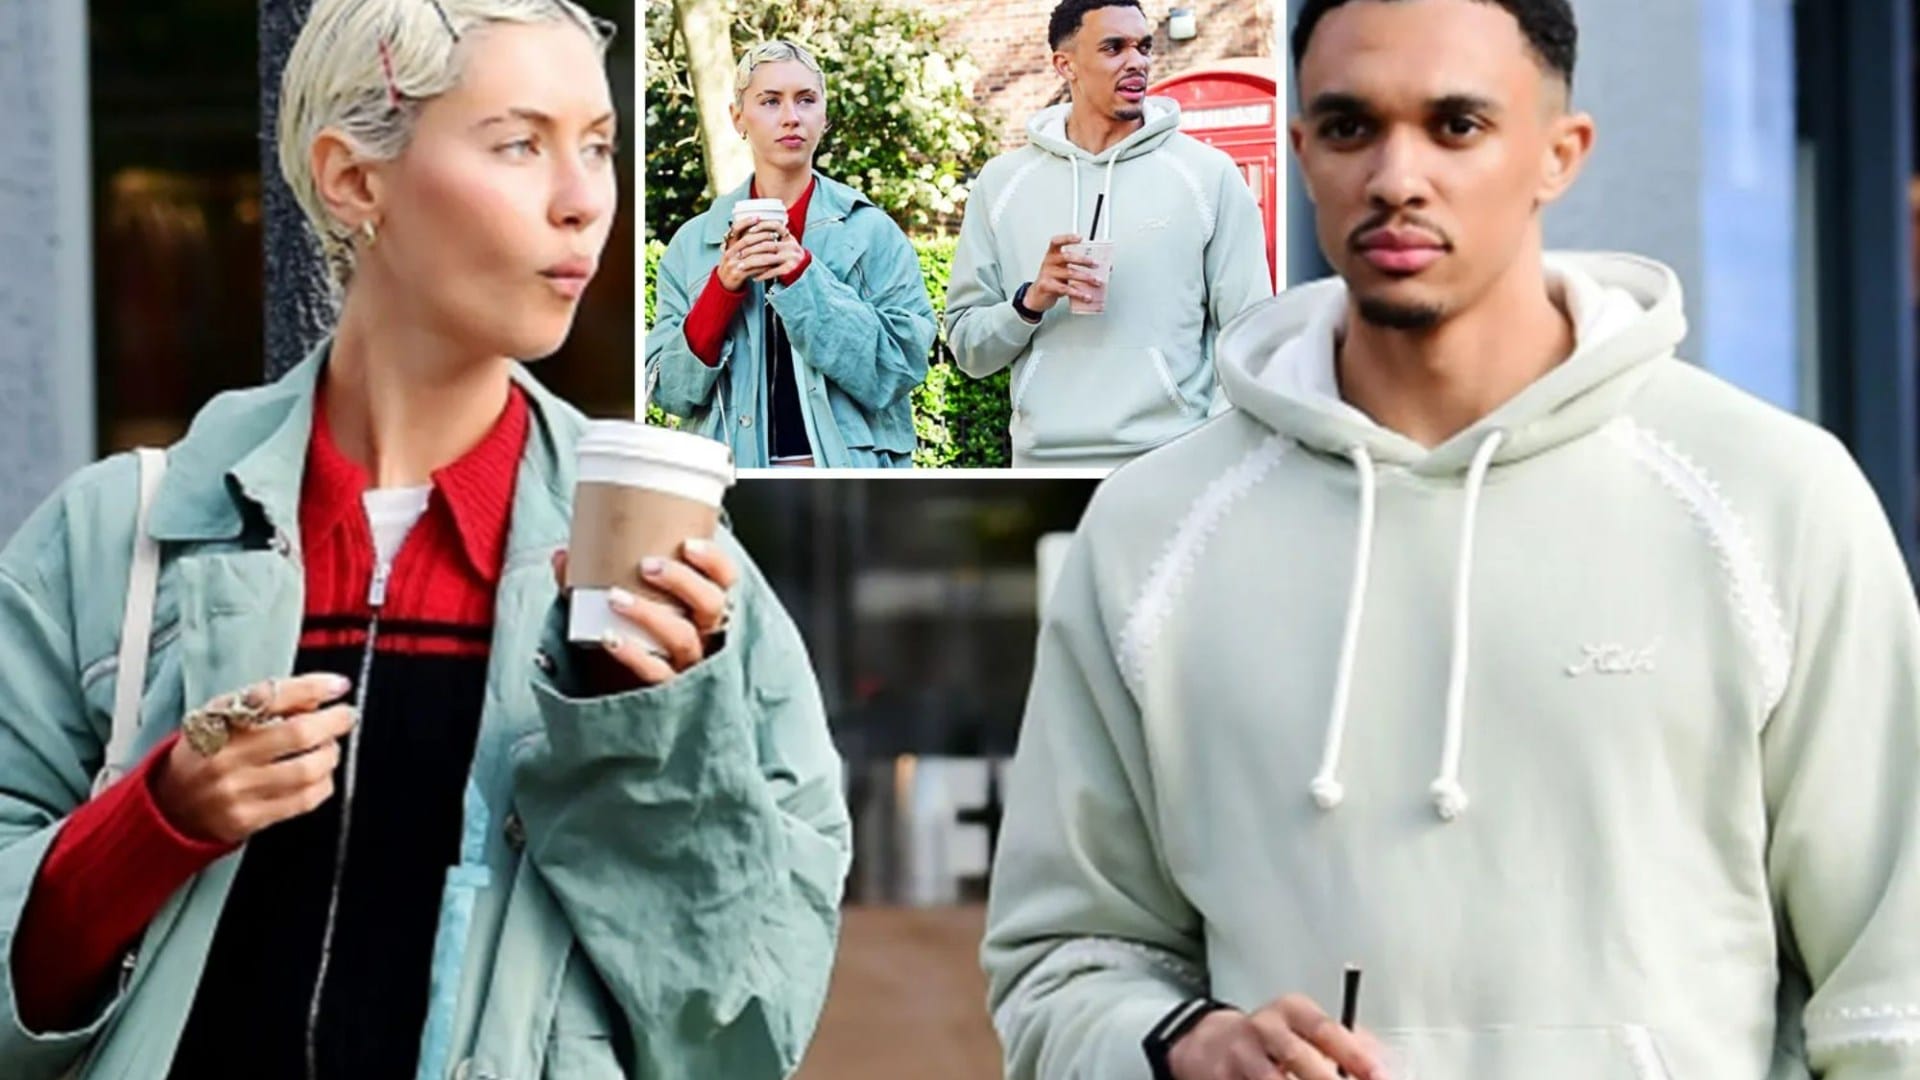 England star Trent Alexander-Arnold spotted with Jude Law's Christian Dior model daughter Iris on stroll in London